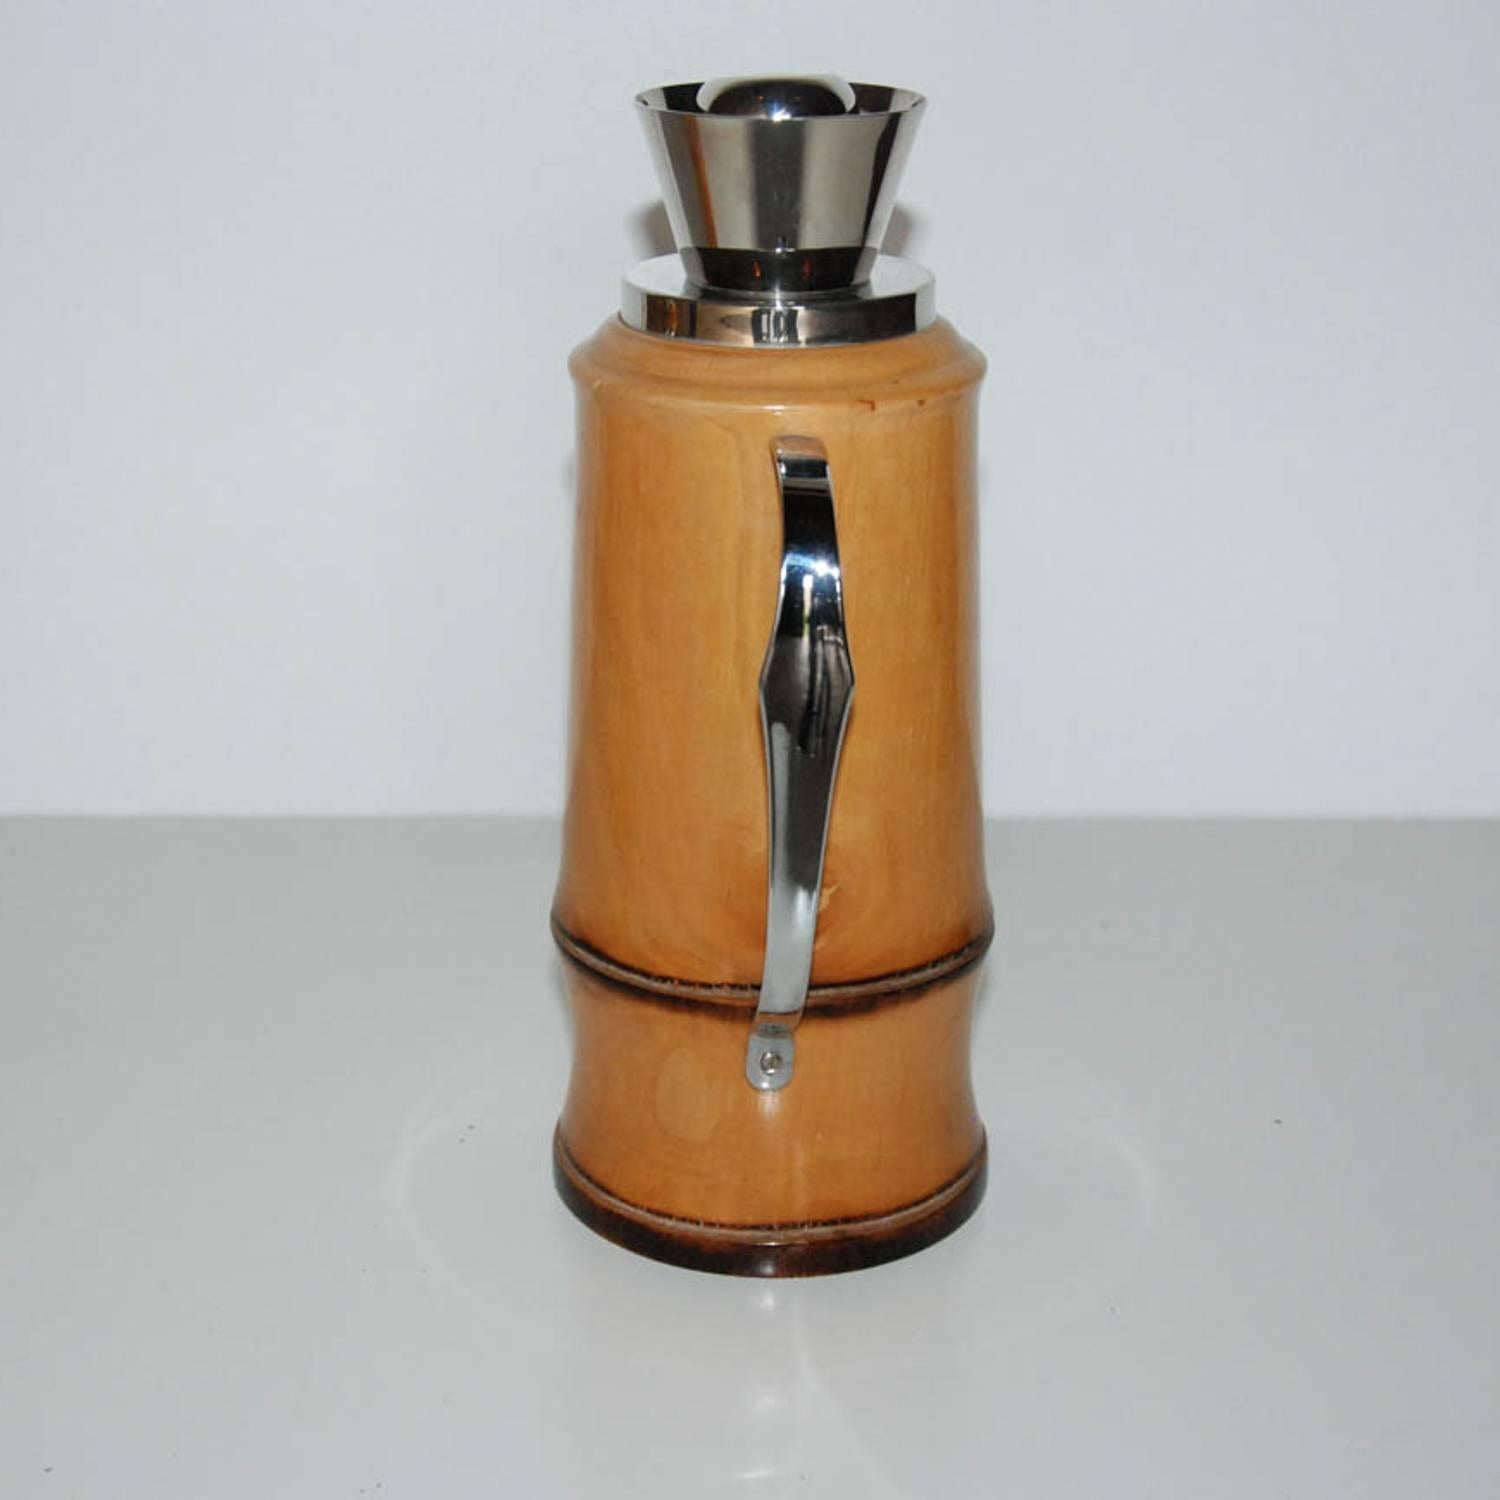 Italian Pair of Aldo Tura Wood and Chrome-Plated Decanters for Macabo, Italy, circa 1950 For Sale